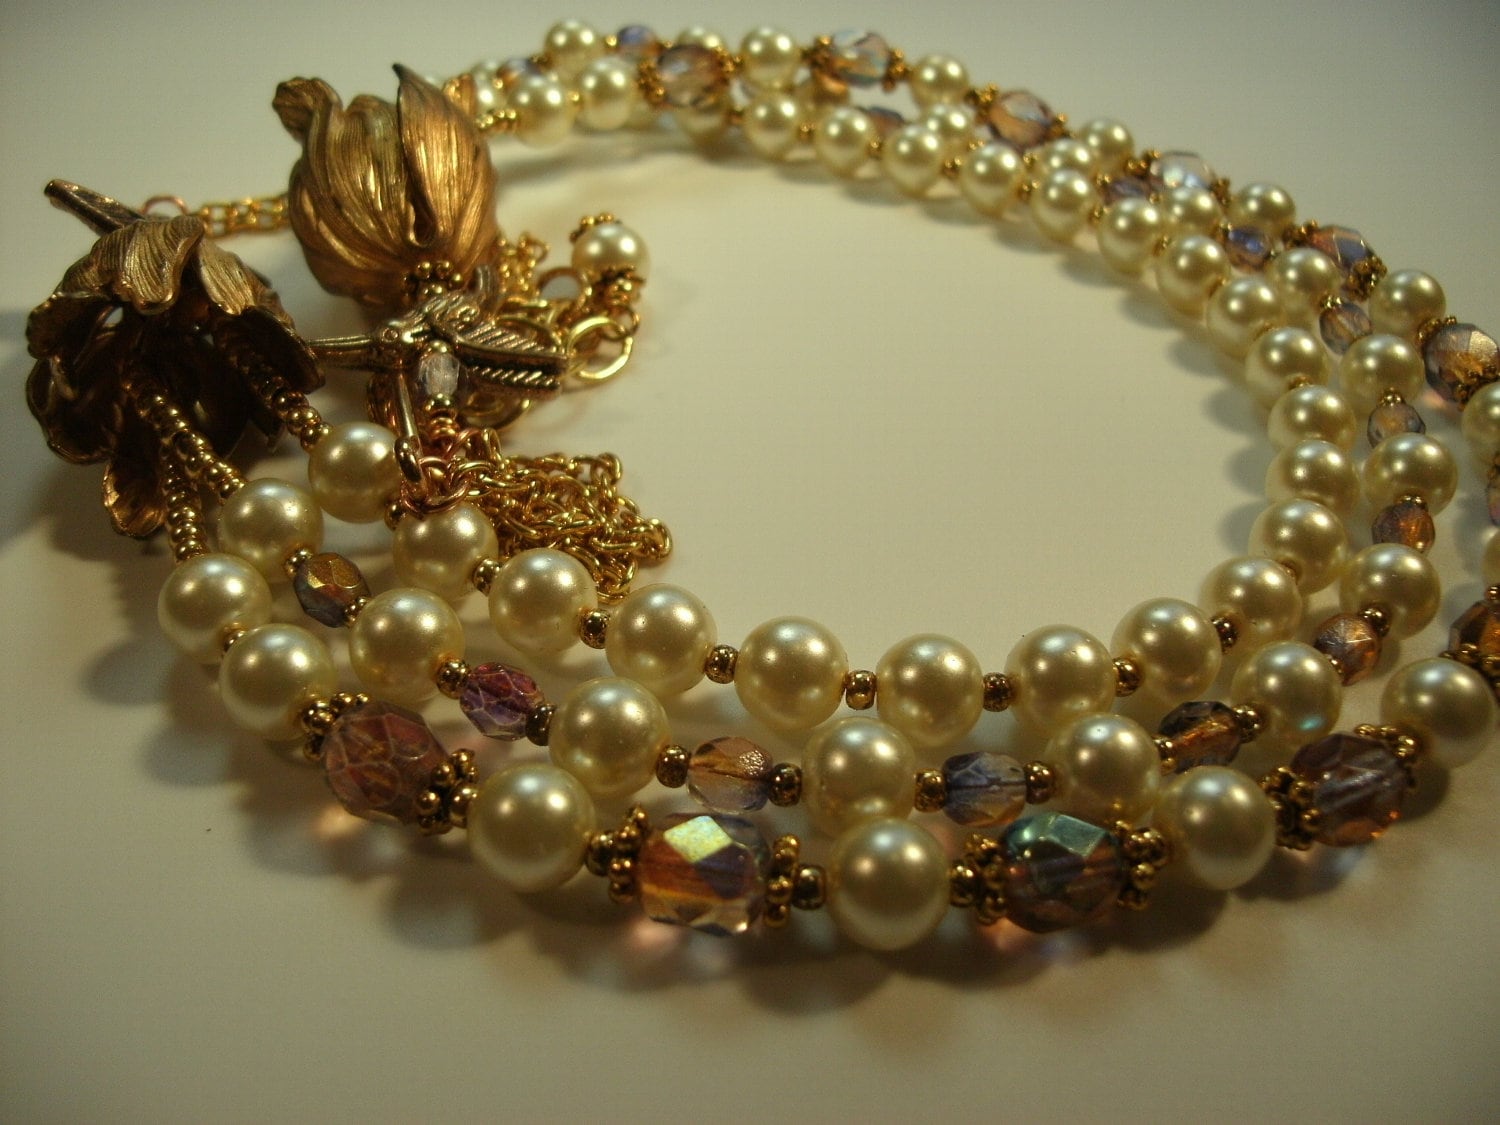 Antiqued Golden Hummingbird and Pearl Necklace